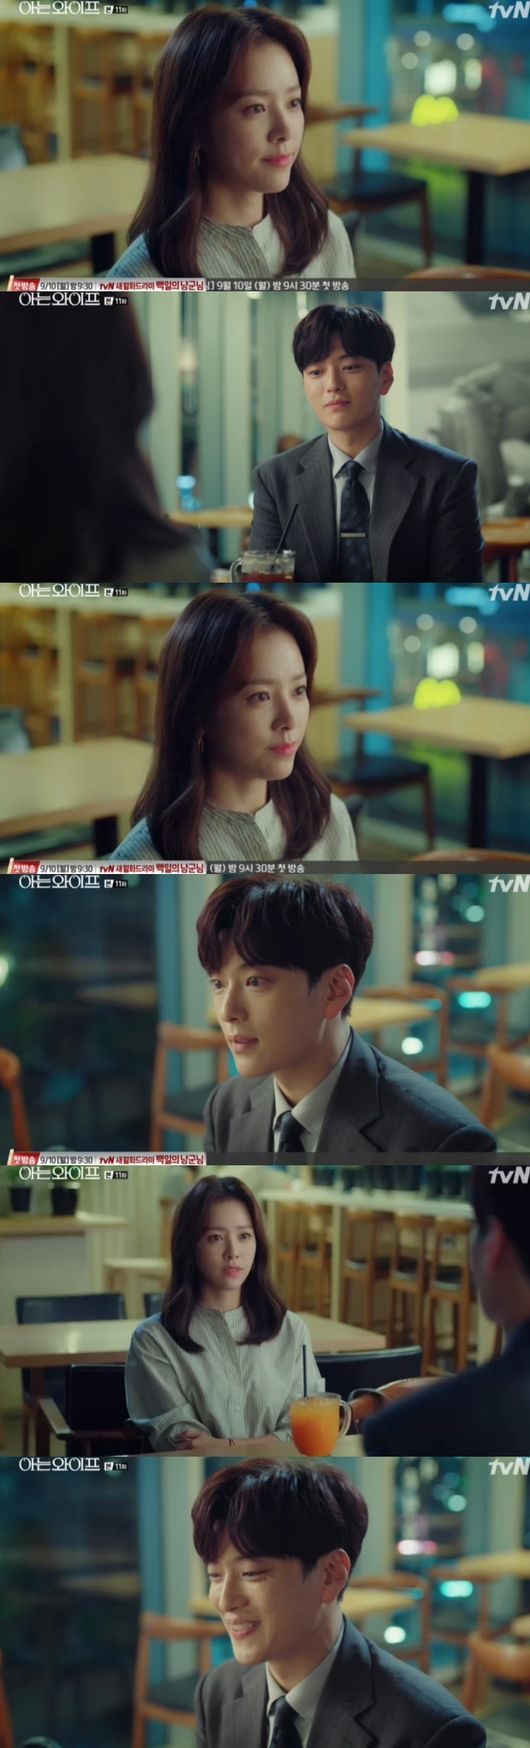 In Knowing Wife, Confessions made it clear that Ji Sung was a former couple to Han Ji-min.In the TVN drama Ai is a Wife (directed by Lee Sang-yeop, played by Yang Hee-seung), which was broadcast on the 5th, Joo-hyuk (Ji Sung), who revealed everything to Woojin (Han Ji-min), was drawn.On this day, Woojin learned his mind toward Juhyeok. Woojin borrowed his strength from alcohol and conveyed his mind in a careful manner.Though he said he liked it with tears, Joo Hyuk refused Woojins mind, saying, No, we cant. At this time, Woojin pulled Joo Hyuk and kissed him.Ju-hyeok did not refuse it without knowing it. At this time, the spirited Ju-hyeok ran away with his lips We are not.Joo Hyuk kept thinking that he would go back to Woojin.After the end, I had dinner with Woojin, and Woojin spoke Carefully, saying that I had to say a little frankly.Woojin said, I do not think I can meet my agent anymore. I am a good person, but I know my head, but I keep seeing the wrong place.I can not do it now, he said, I am sorry that I did not start from the beginning. After the end, he laughed, saying, I asked you to meet me for a month and decide.I did not commit a crime to die, and if men and women do not fit, I can break up, he said. I was kicking, tea, and so on. He naturally suggested that I go back to my comfortable colleagues.Woojin sighed on the roof, and Joo Hyuk looked at it.Please think about it again after the end, he said. Anyone who really likes Mr. Woojin, if it is because of that day, can make a mistake.But Woojin said, It is not a mistake. I do not want any answers, I have just been through a hard time, and I know how close you are, so please do not force me to do anything else.Ju-hyeok did not answer.Woojin continued, Do not be too uncomfortable, if you are uncomfortable, do not make that kiss any meaning, he said. I am a drunken person like you said.The last who came up on the roof was shocked to hear this conversation.Ju-hyeok, who did not have Ali, noticed the extraordinary end of the day. He asked what was going on, and the end of the day punched him.How can you do this to me, how can I believe you, and how can I be so deceitful? I do not like people, but at least I should have given them a tee, I was thrilled by the superiority because my favorite woman liked you.I do not think so, Woojin and I, he said, and after the end, he left, saying, What is certain is that you are a bad guy for me.Im sorry, but its not what you really thought, he said, packing up his luggage.At this time, the burden was overturned, and the end that followed Juhyuk put the burden back and said, Do not mistake it for watching. I do not do anything that is not like you, so I do not do anything to kick out a woman because of a woman.There was a feeling of discomfort between them.When he returned home, he asked if he could apply for a branch transfer to the provider.At this time, Woojin reported that Joo Hyuk had applied for a branch transfer to the provider. Woojin said, Is it because of me, thats why it was today?That night, Woojin found out who the man had been in his dreams, and he finally realized that the man who had appeared was Ju-hyeok, and then he cried with pain in his heart.Woojin came to Juhyeok late at night.I had a dream to dream again tomorrow, a dream that a man appeared, he said. I was in a dream, I was married to the man, I had a child, I was angry and I was going to die, I was in a dream, I just saw it in my dream.It was a car, what is this? Is it just a coincidence? Is it just a dream? Do you know anything?It was strange that my mother knew my house, knew my trivial habits, and called my mother a car room.Joo Hyuk said, Woojin, and Woojin said, Every time I call it that, my heart is strangely sad and sick. What is this?I do not know what to do. Juhyuk said, It was our couple, I was married to you. Confessions, Woojin said, What? It was a couple, we, Ju-hyuk said once again, Woojin was shocked.Capture the broadcast screen of Knowing Wife